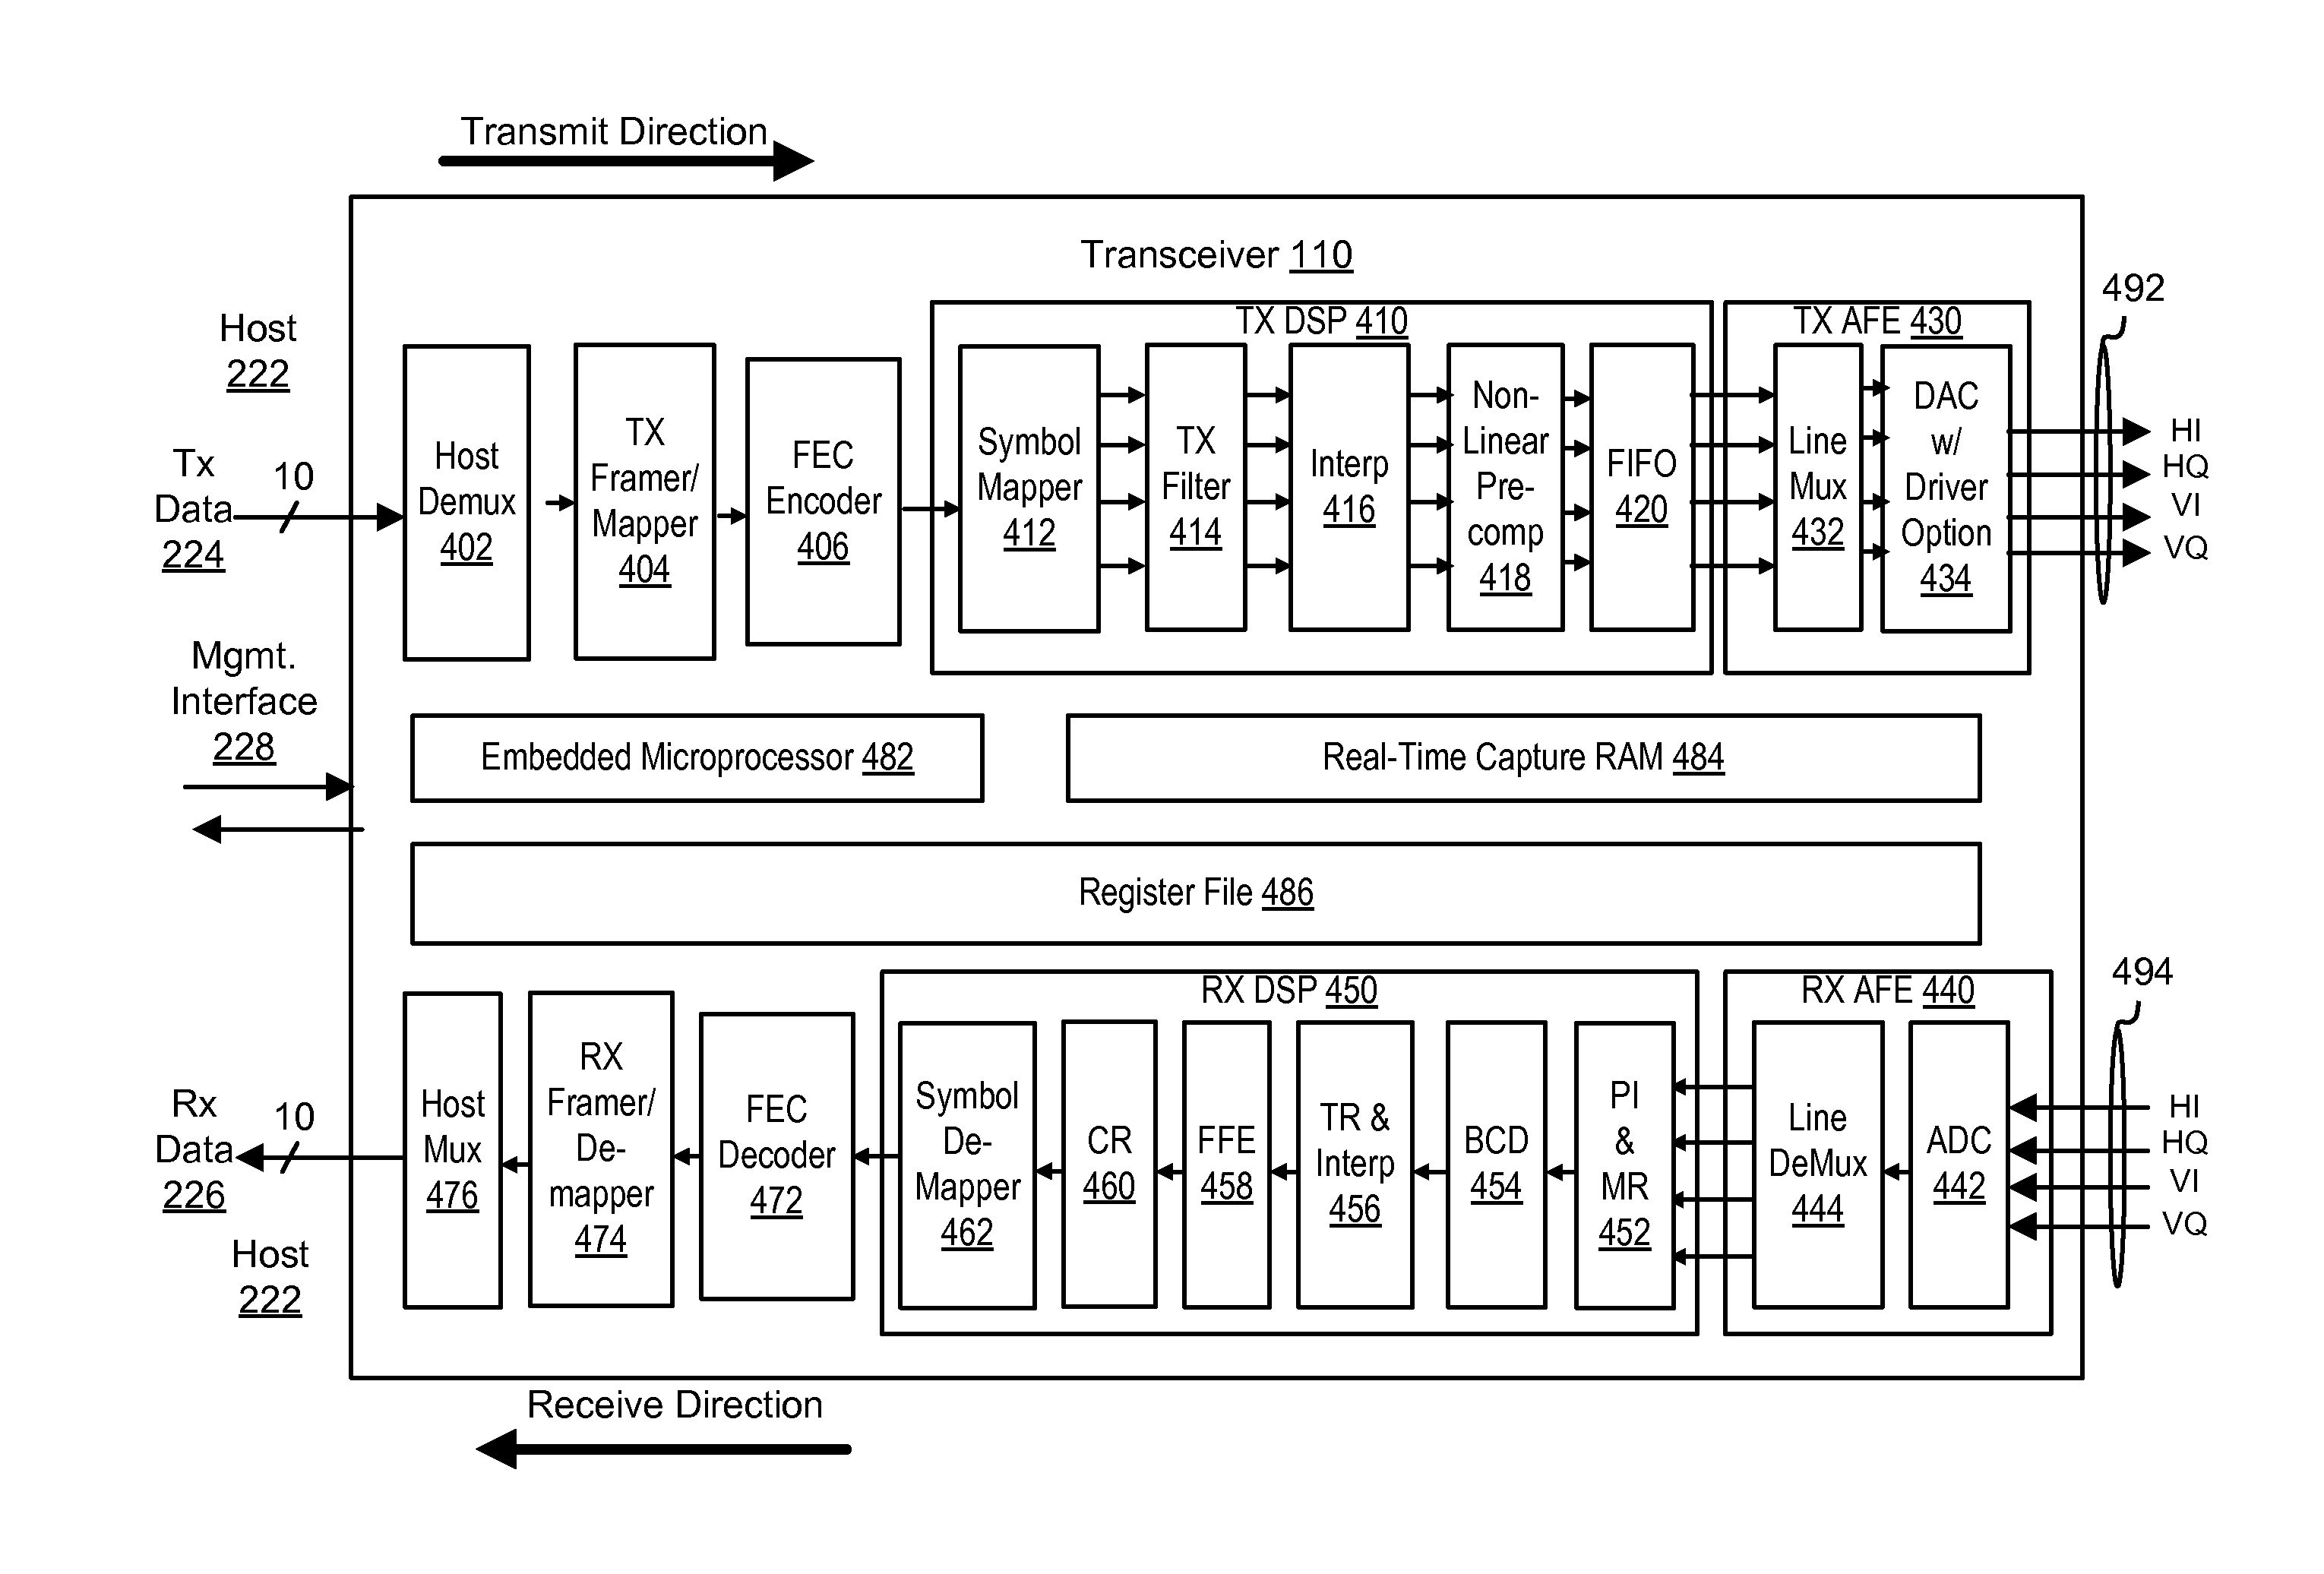 Coherent optical transceiver with programmable application modes